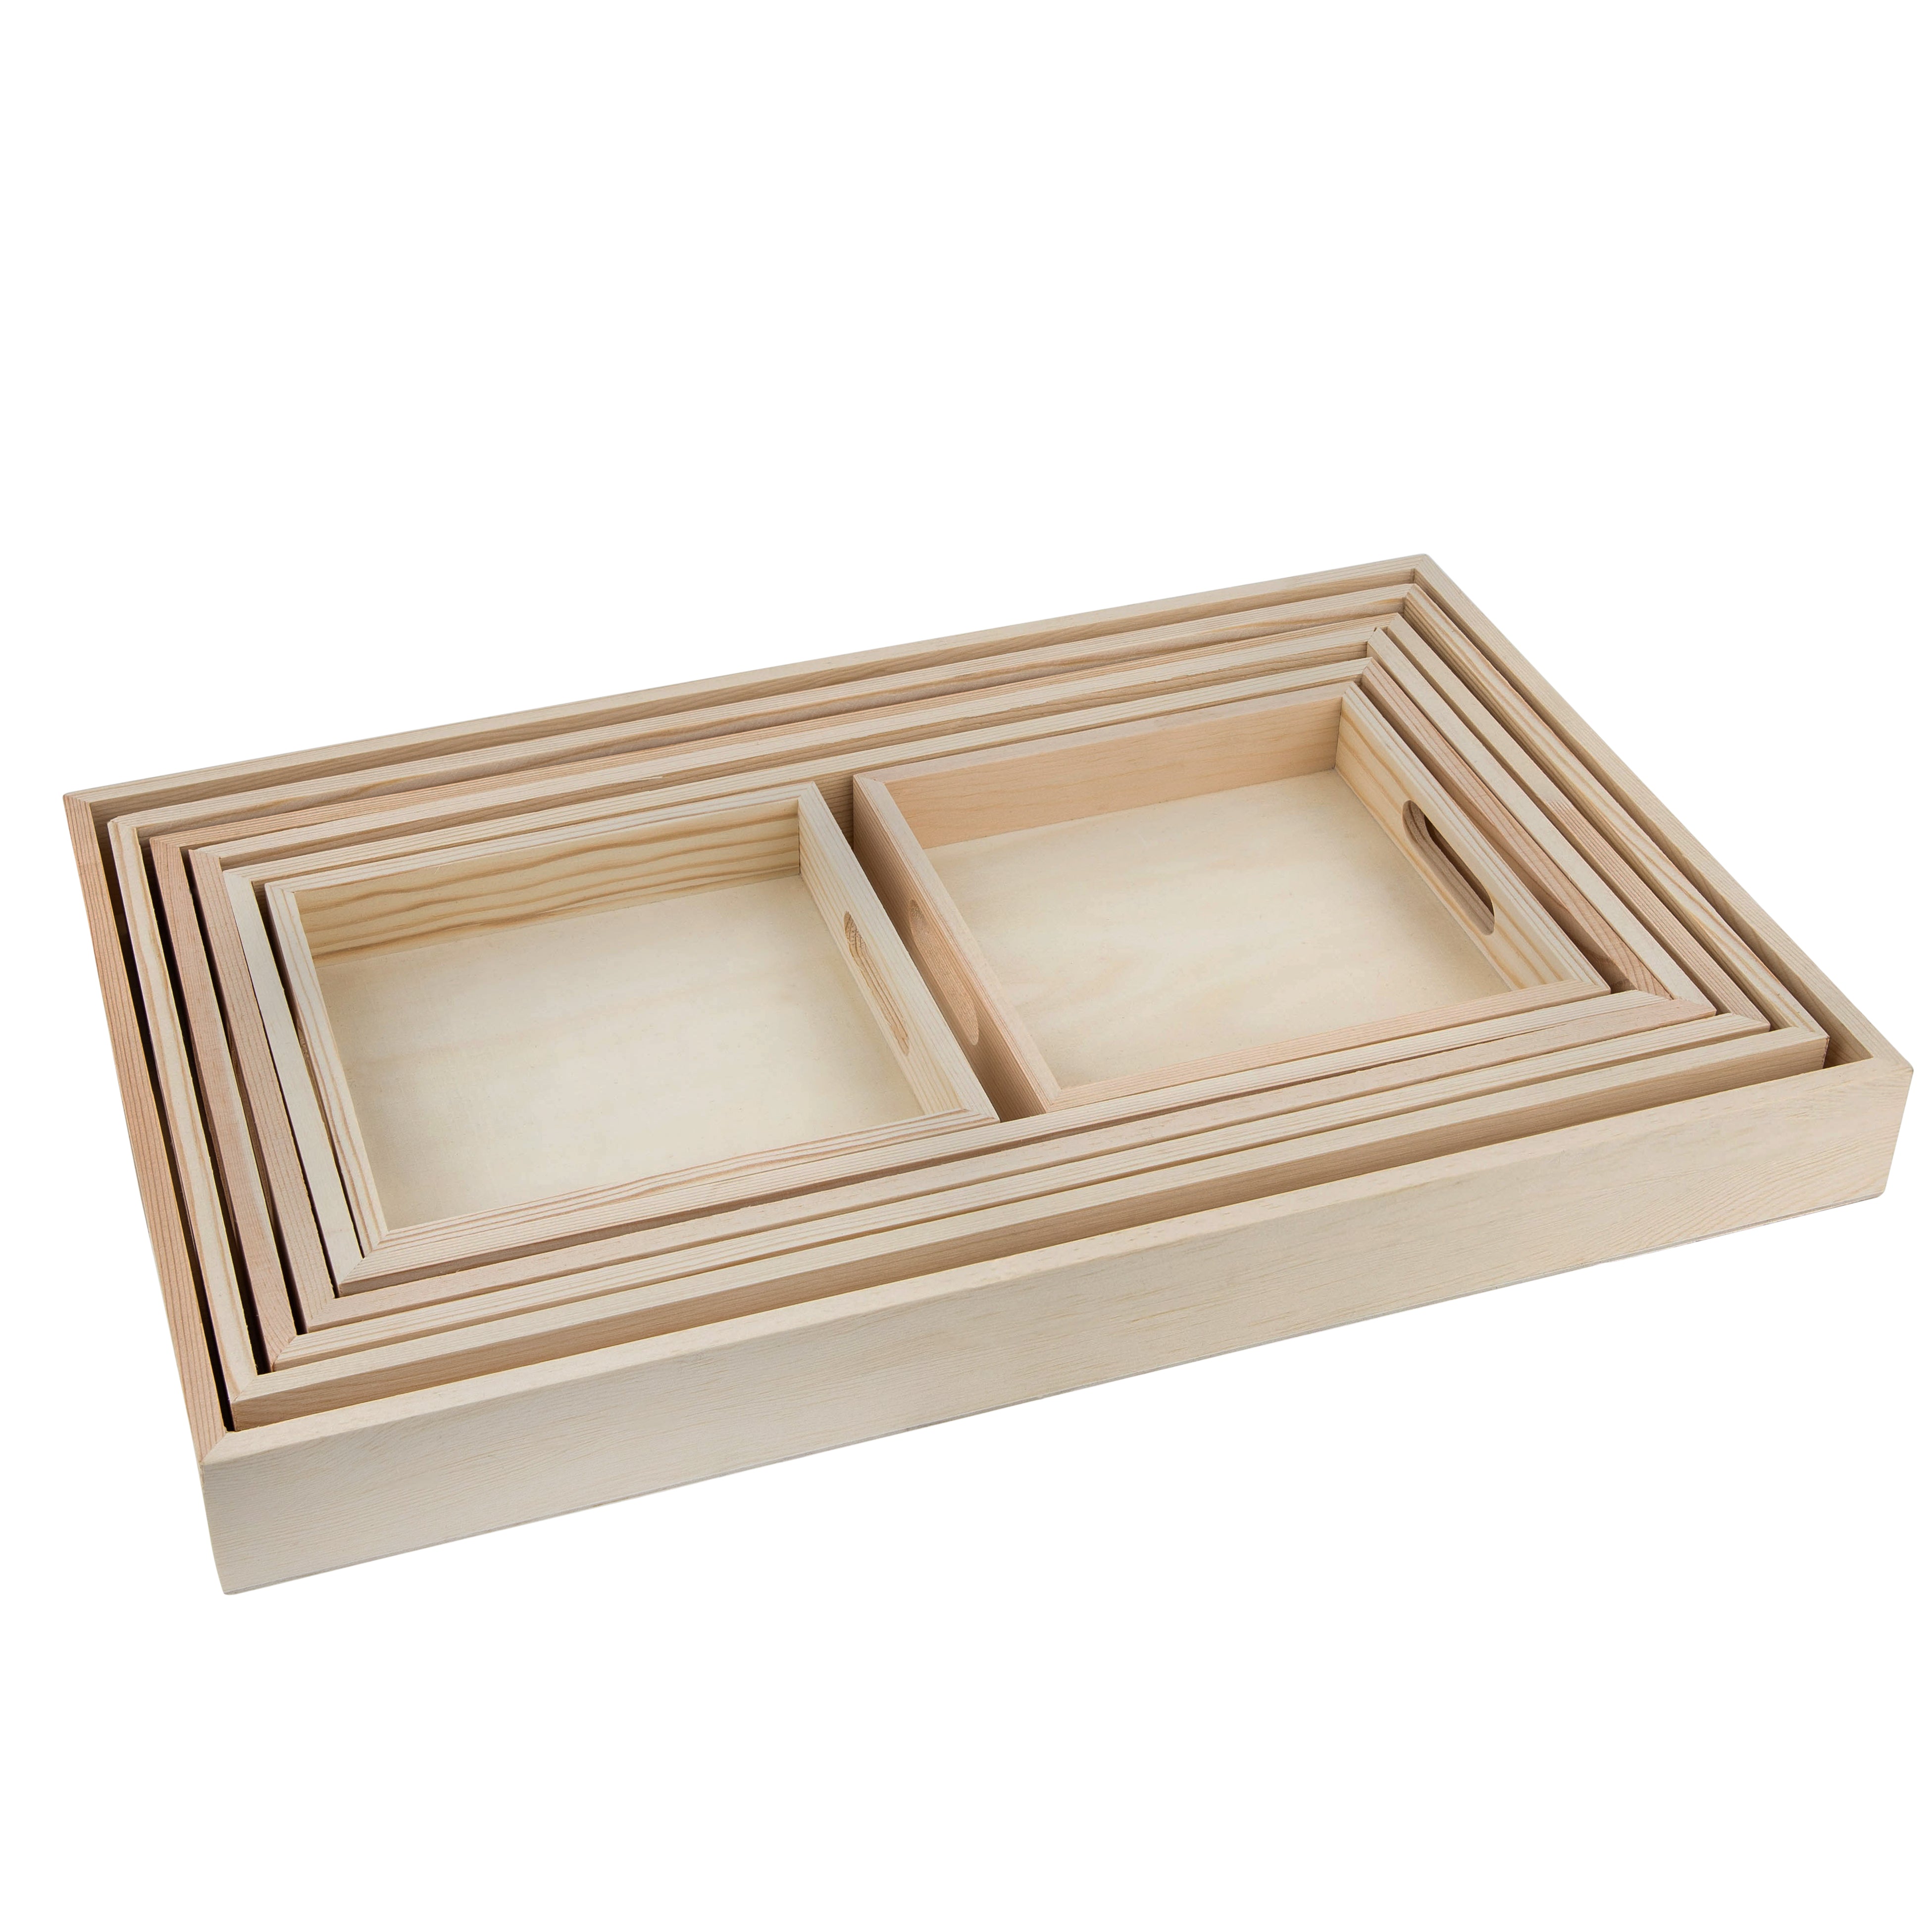 Rectangular Sectional Wooden Trays 2 Pack 7X14X1.25